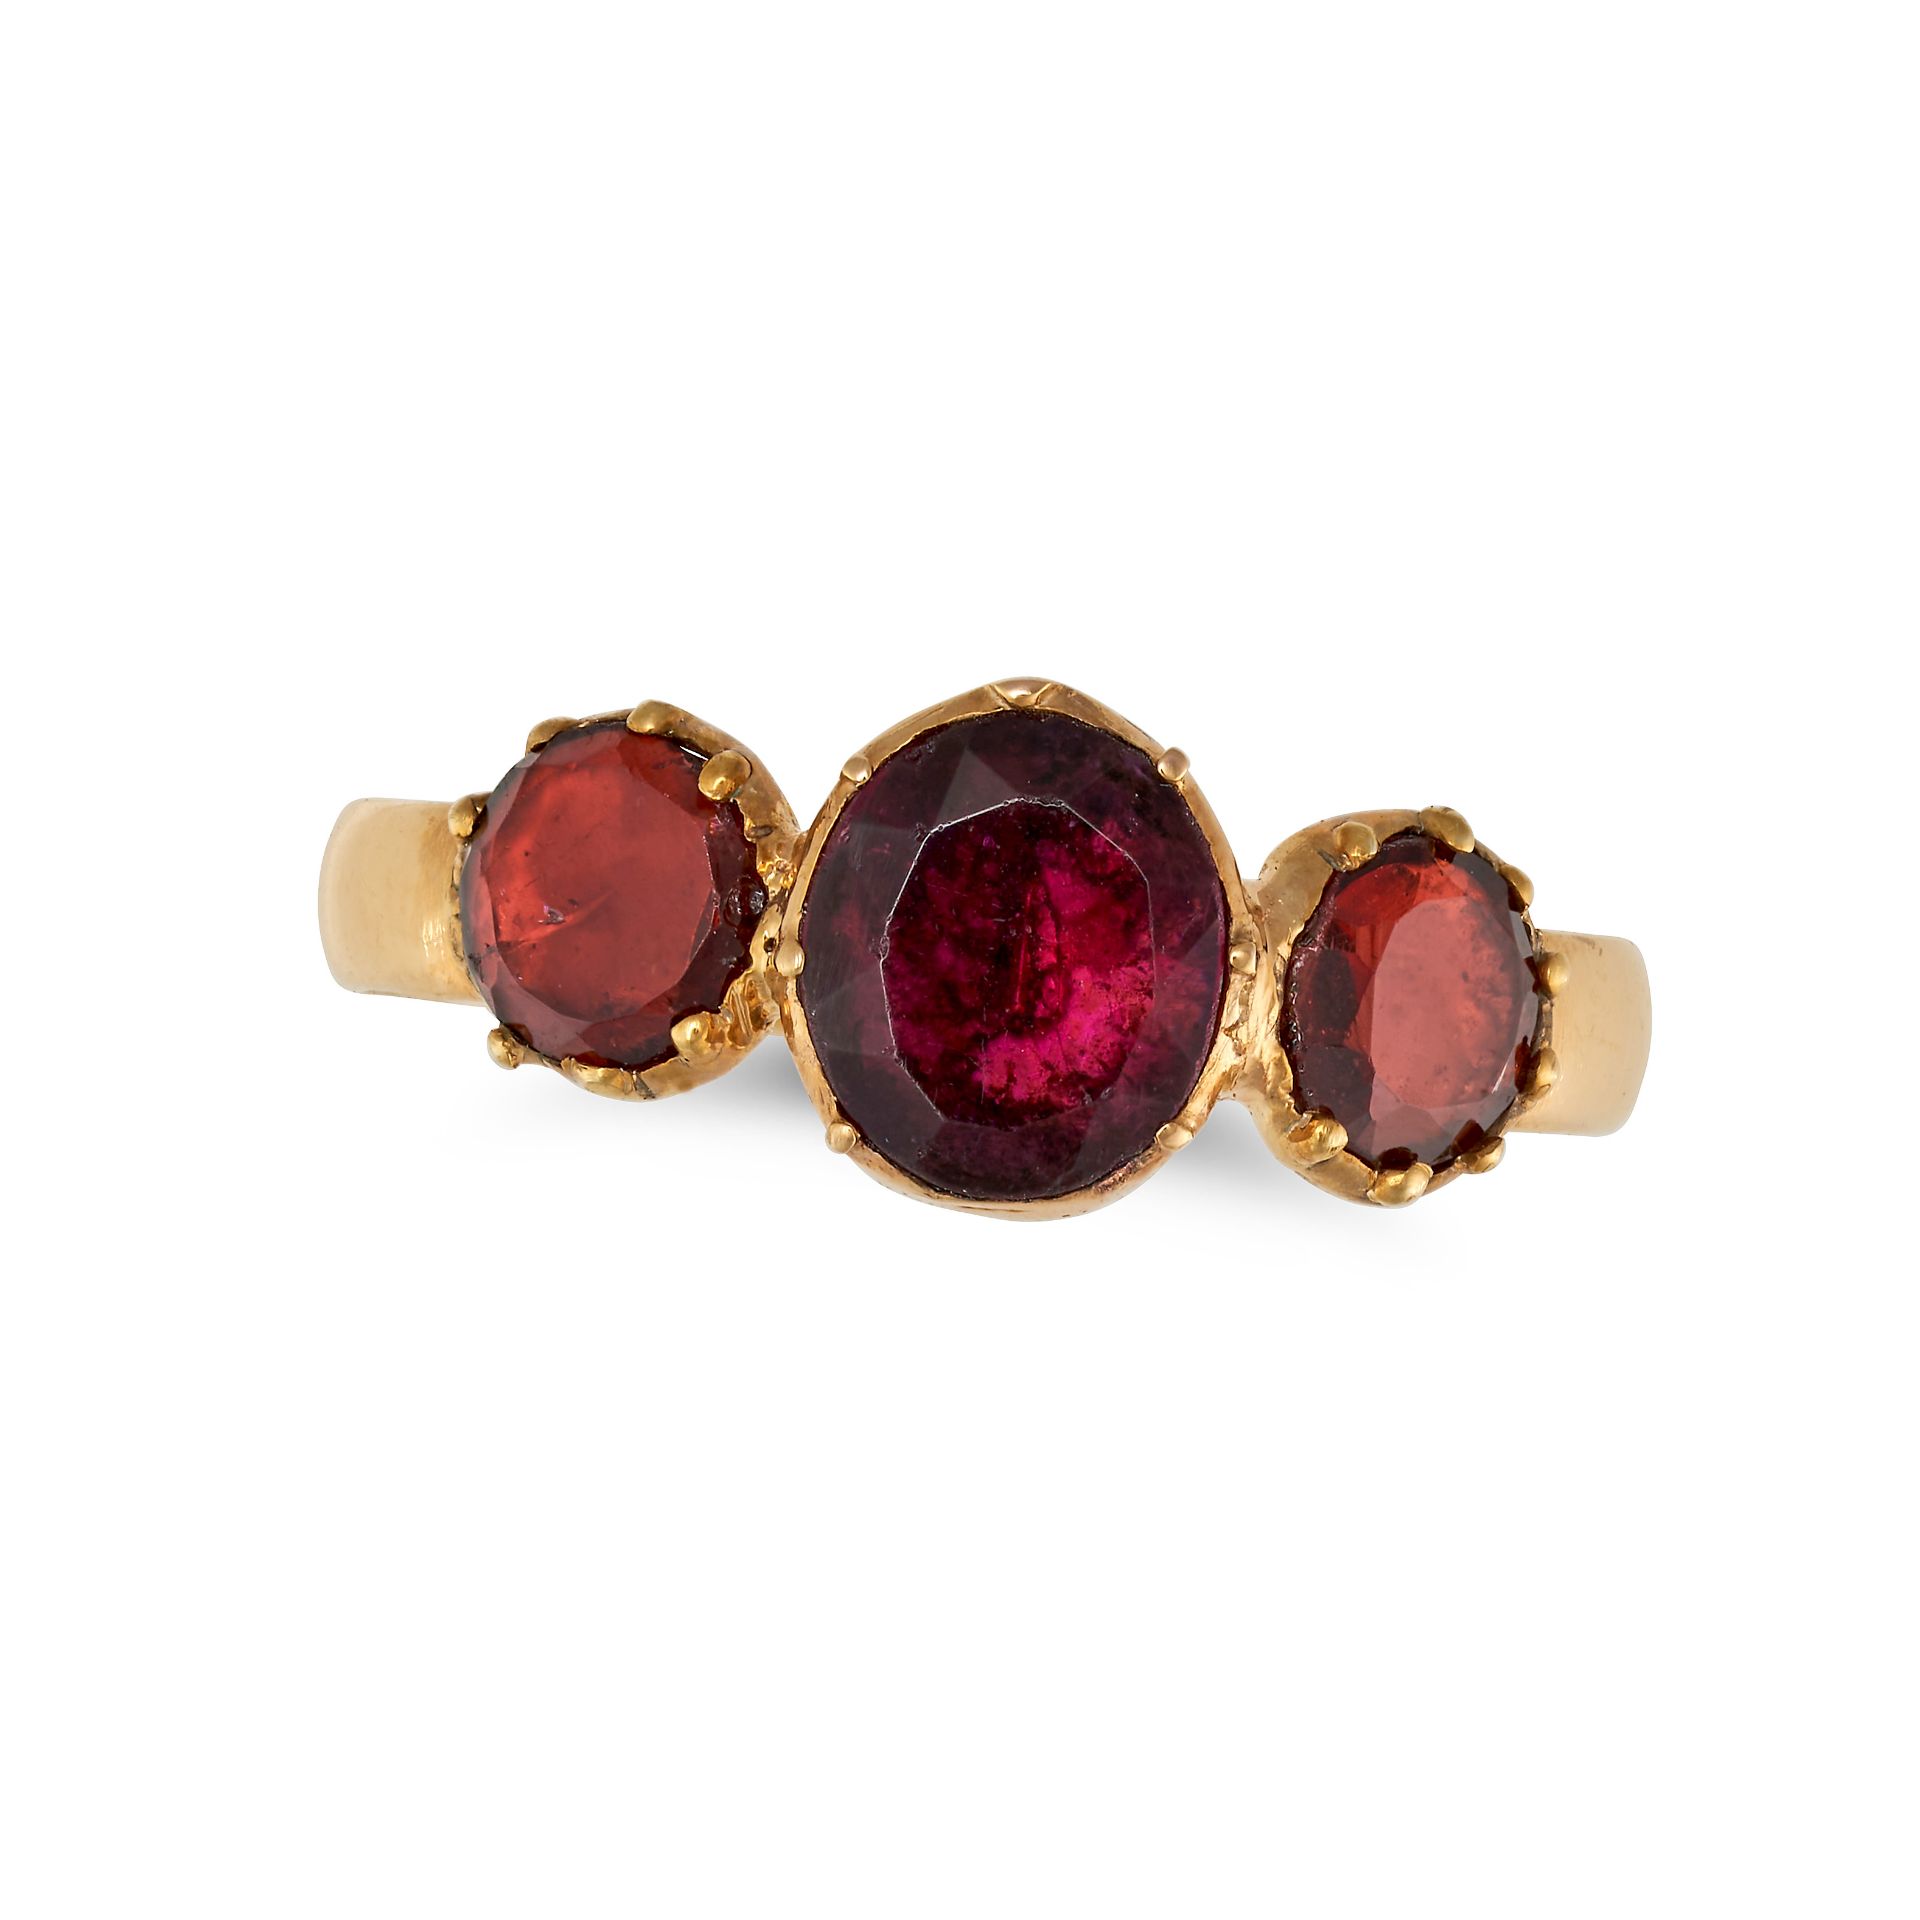 AN ANTIQUE THREE STONE GARNET RING in 18ct yellow gold, set with an oval cut garnet between two r...